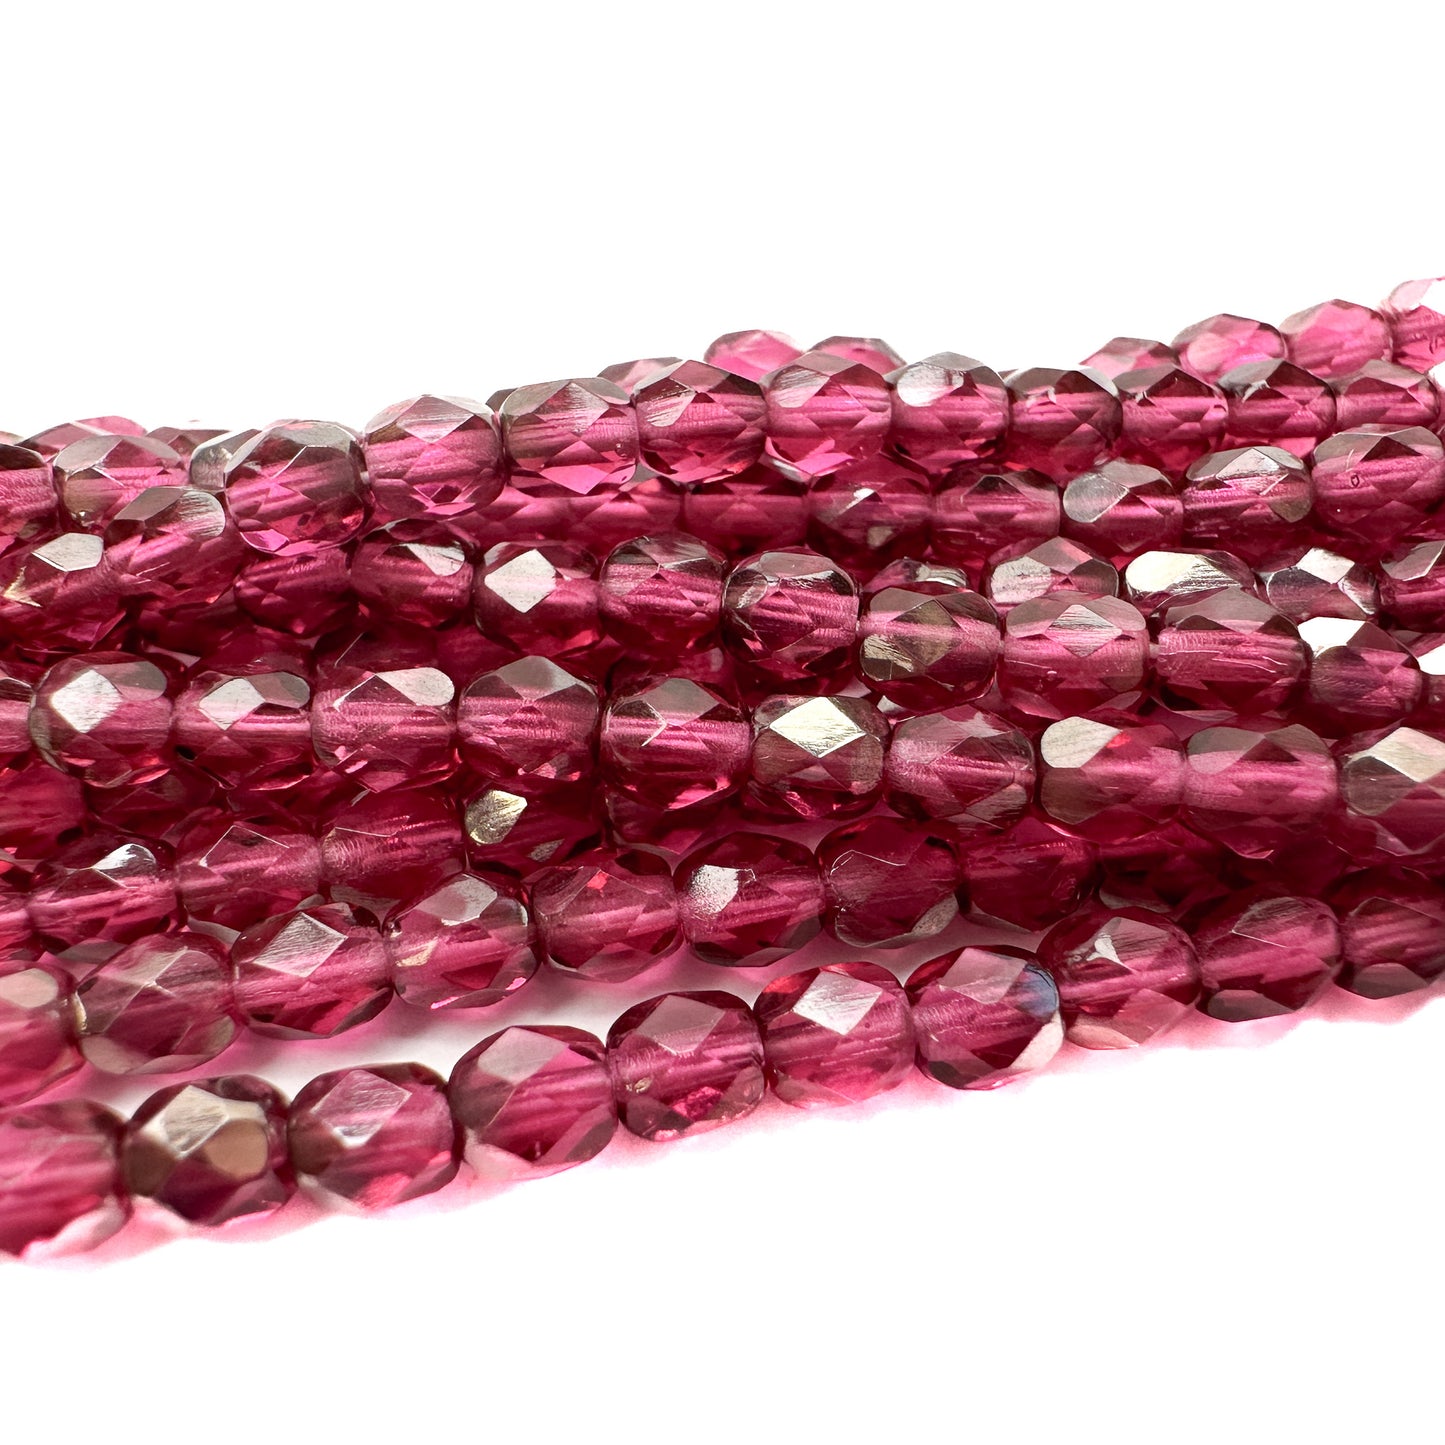 Fuchsia with Platinum Half Coat 4mm Faceted Glass Bead - 50 pcs.-The Bead Gallery Honolulu